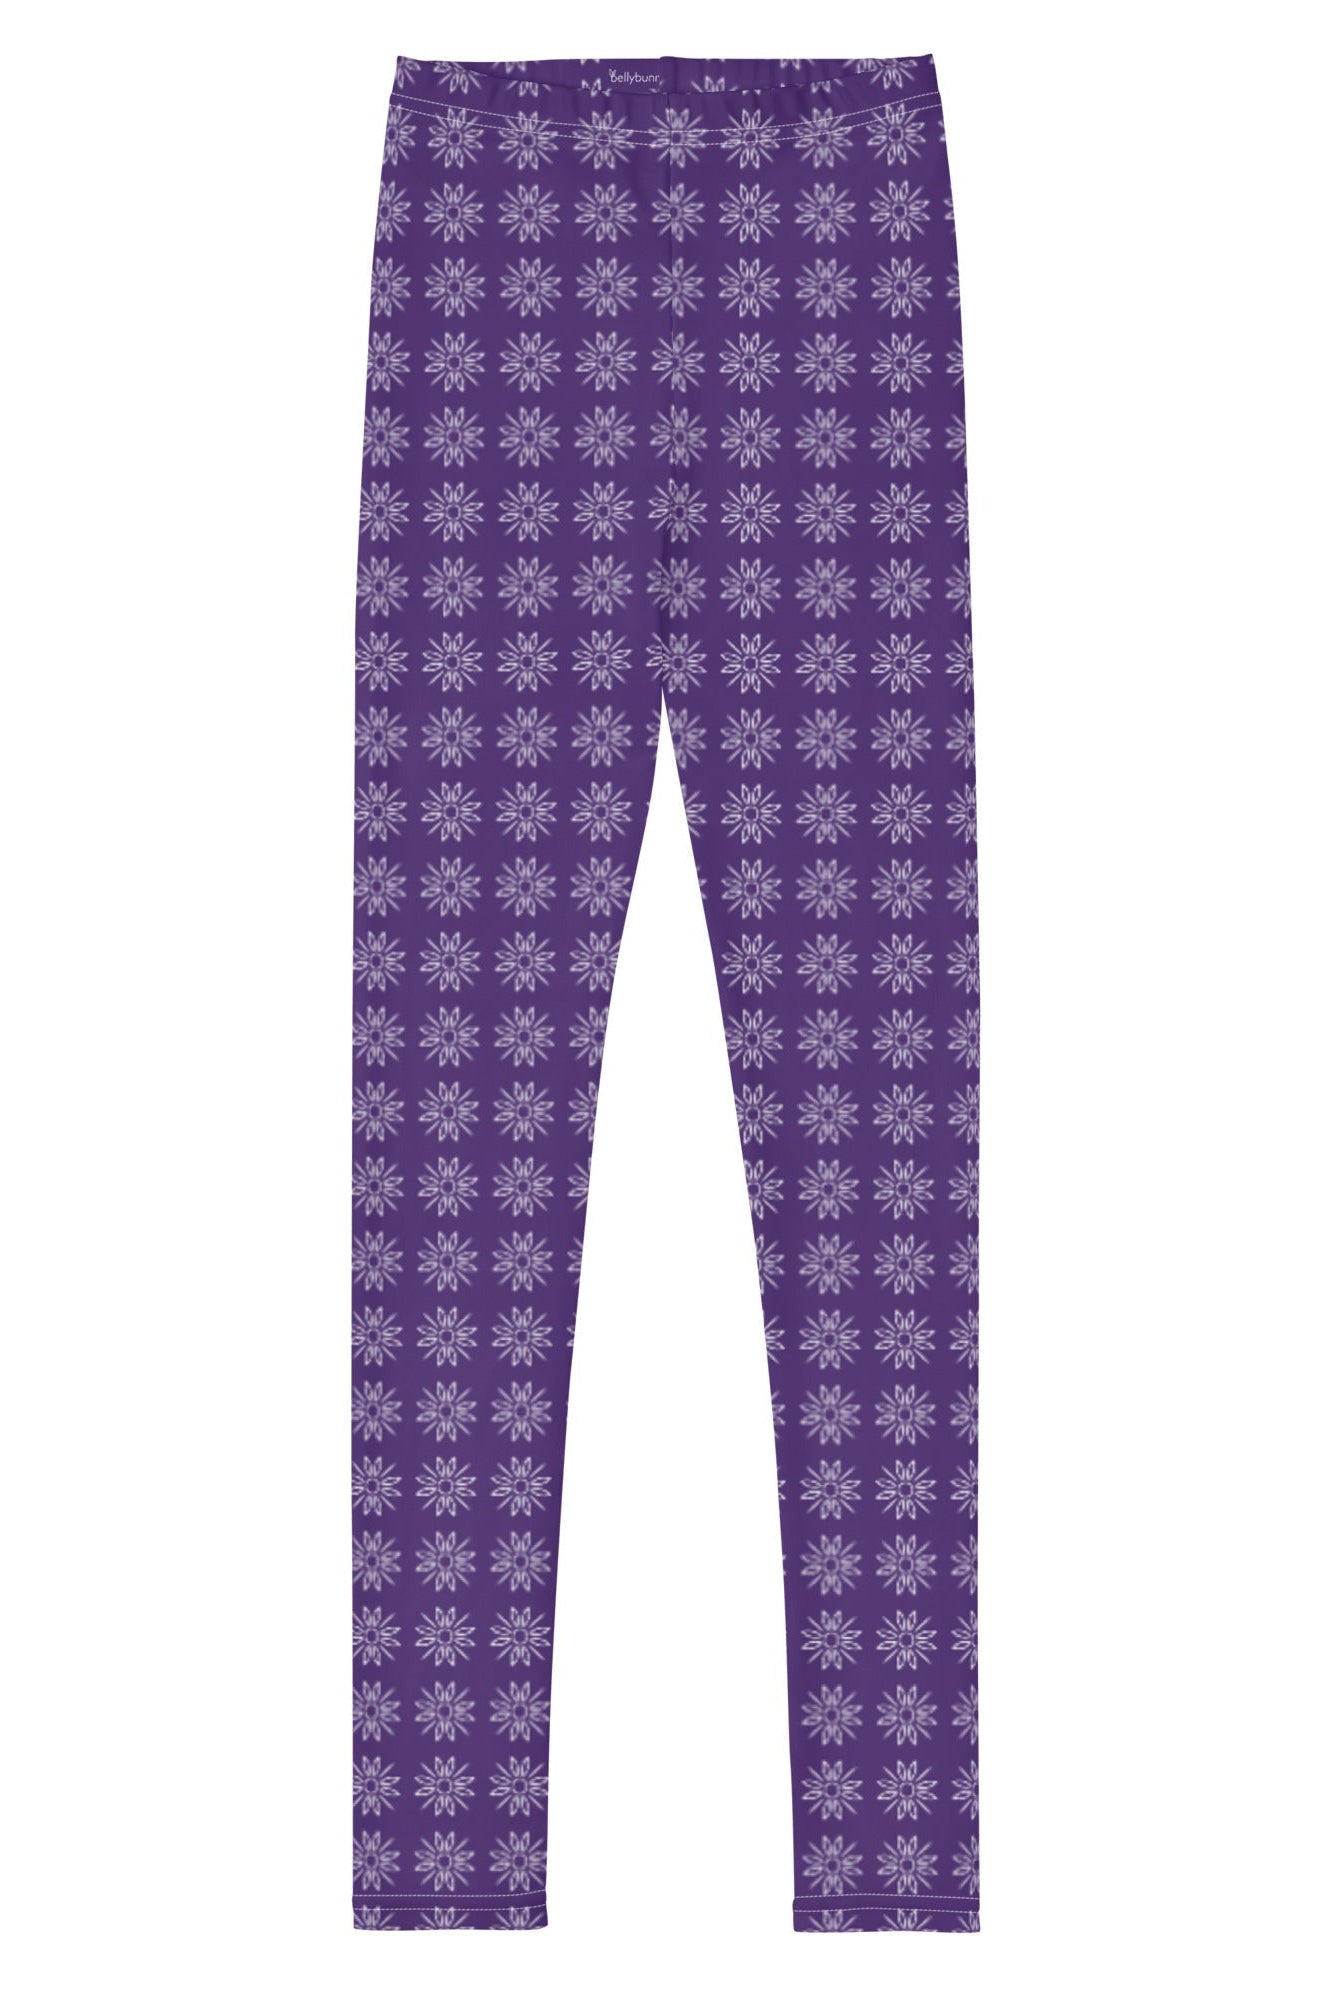 Bellybunny-Youth Leggings-purple with sun pattern